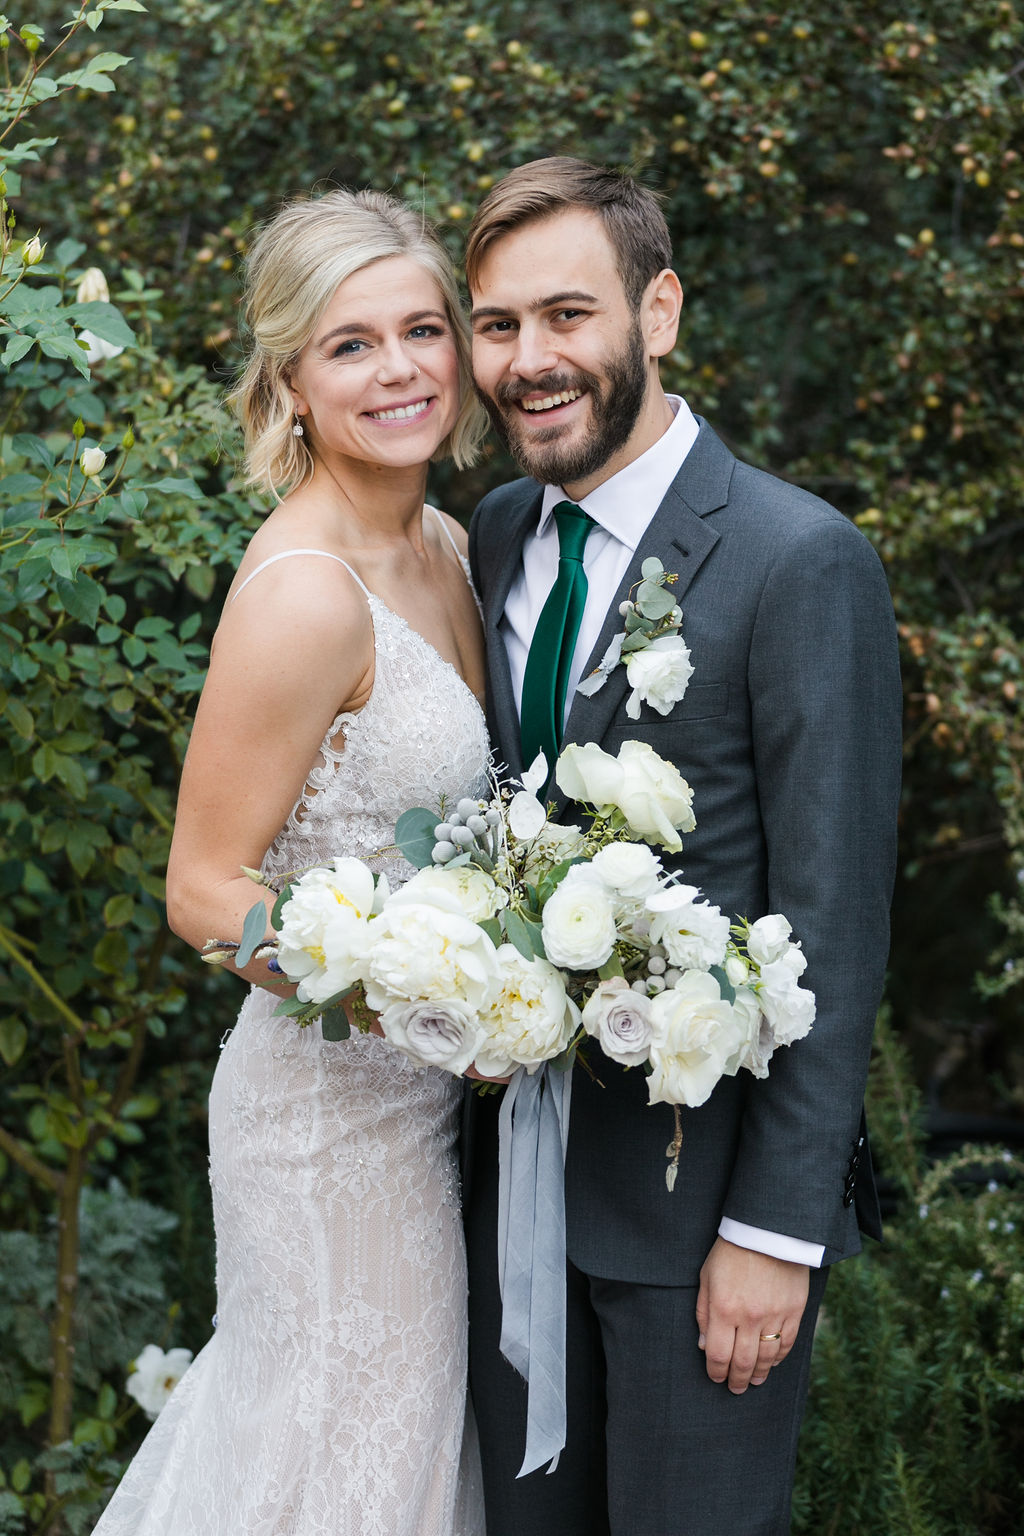 A Romantic Forest Inspired Wedding at the 1909, bride and groom portrait shot